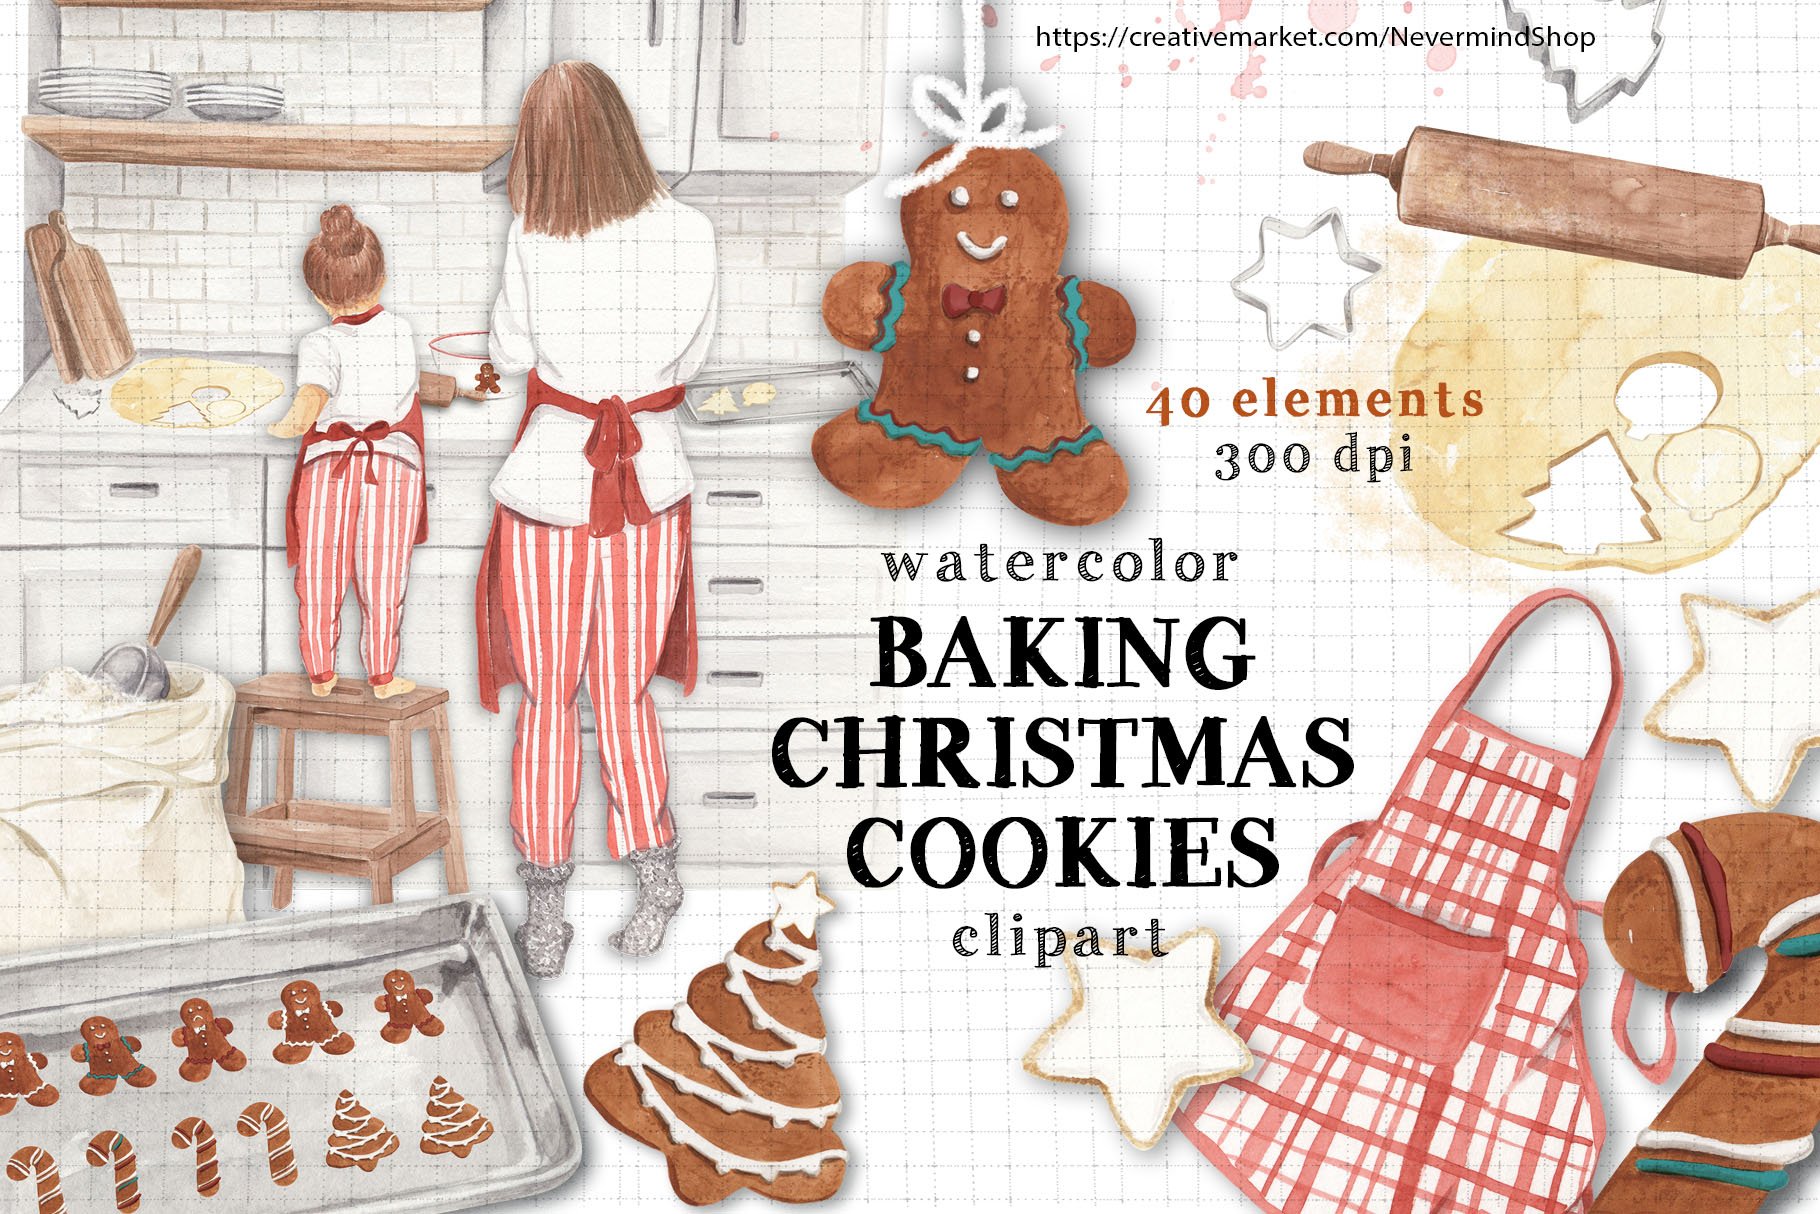 Christmas baking watercolor clipart cover image.